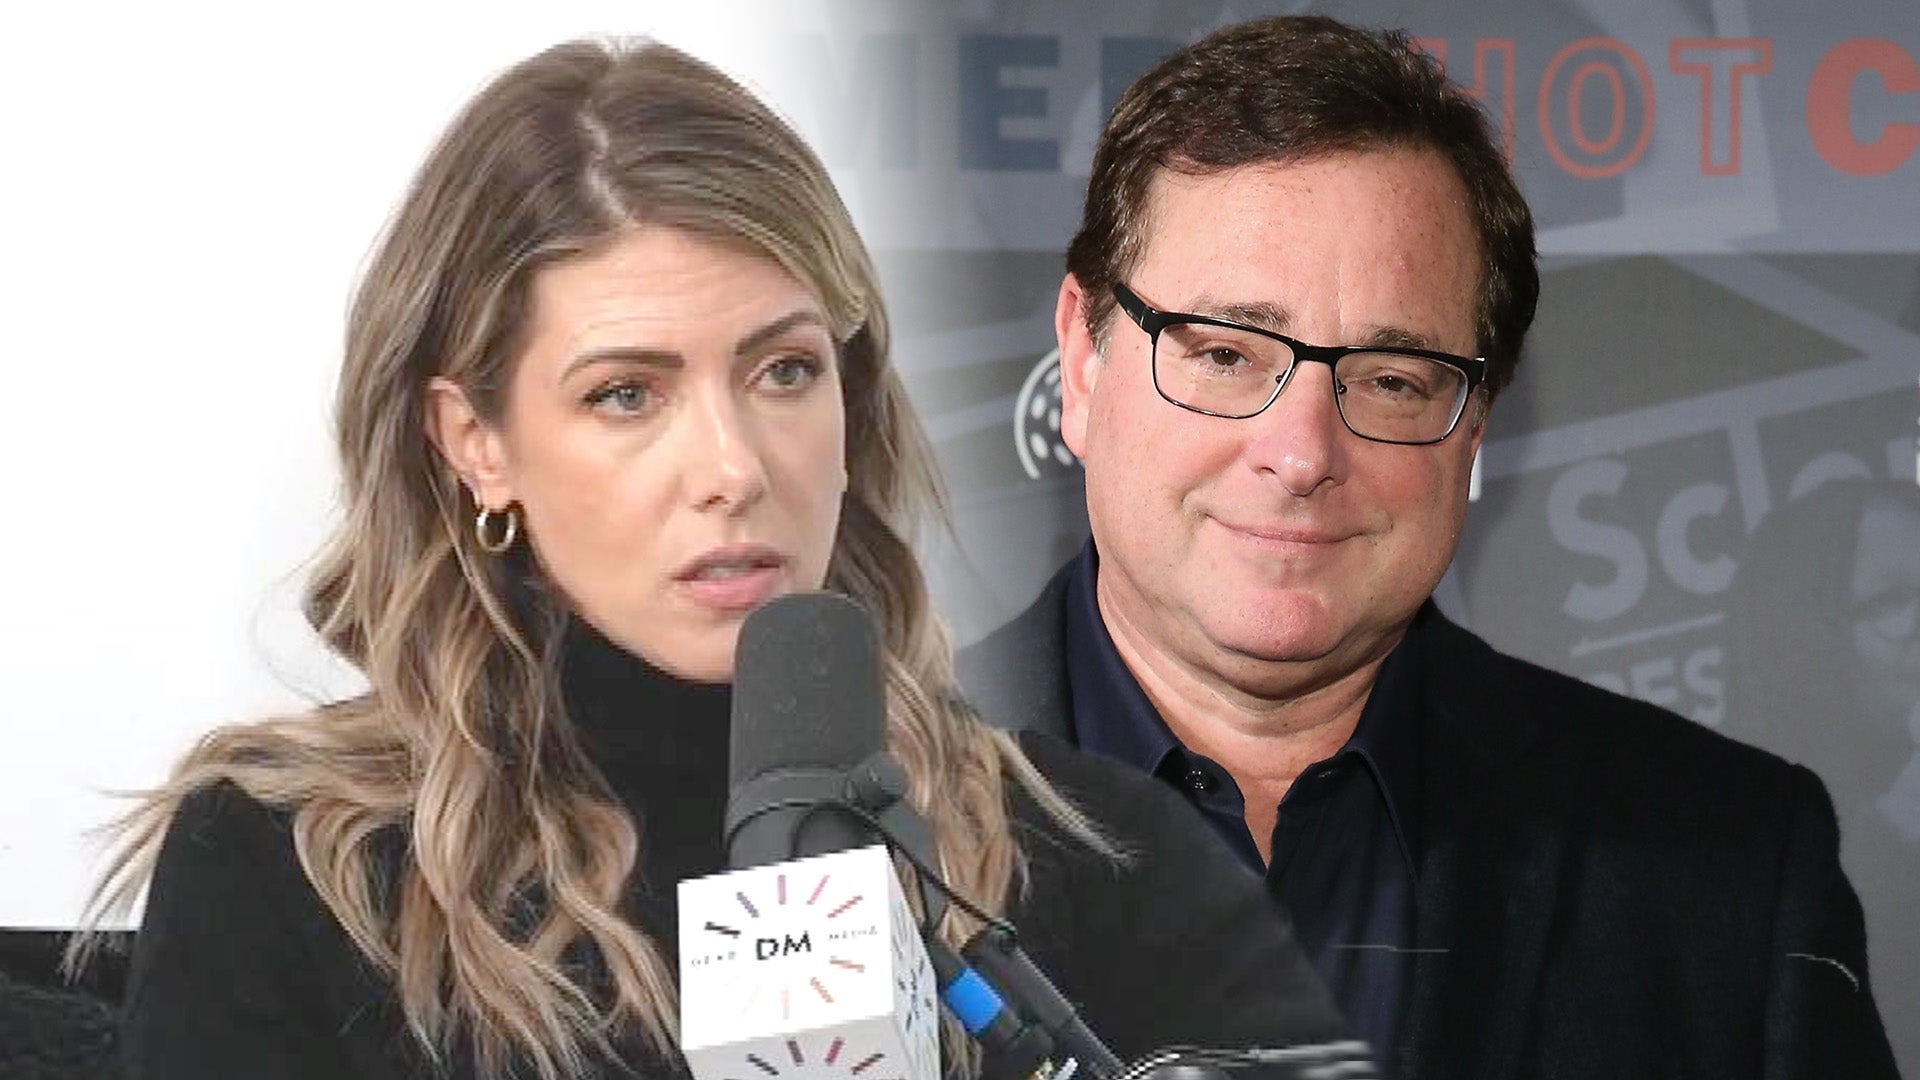 Bob Saget's Widow Kelly Rizzo Gives New Details About His Mysterious Death